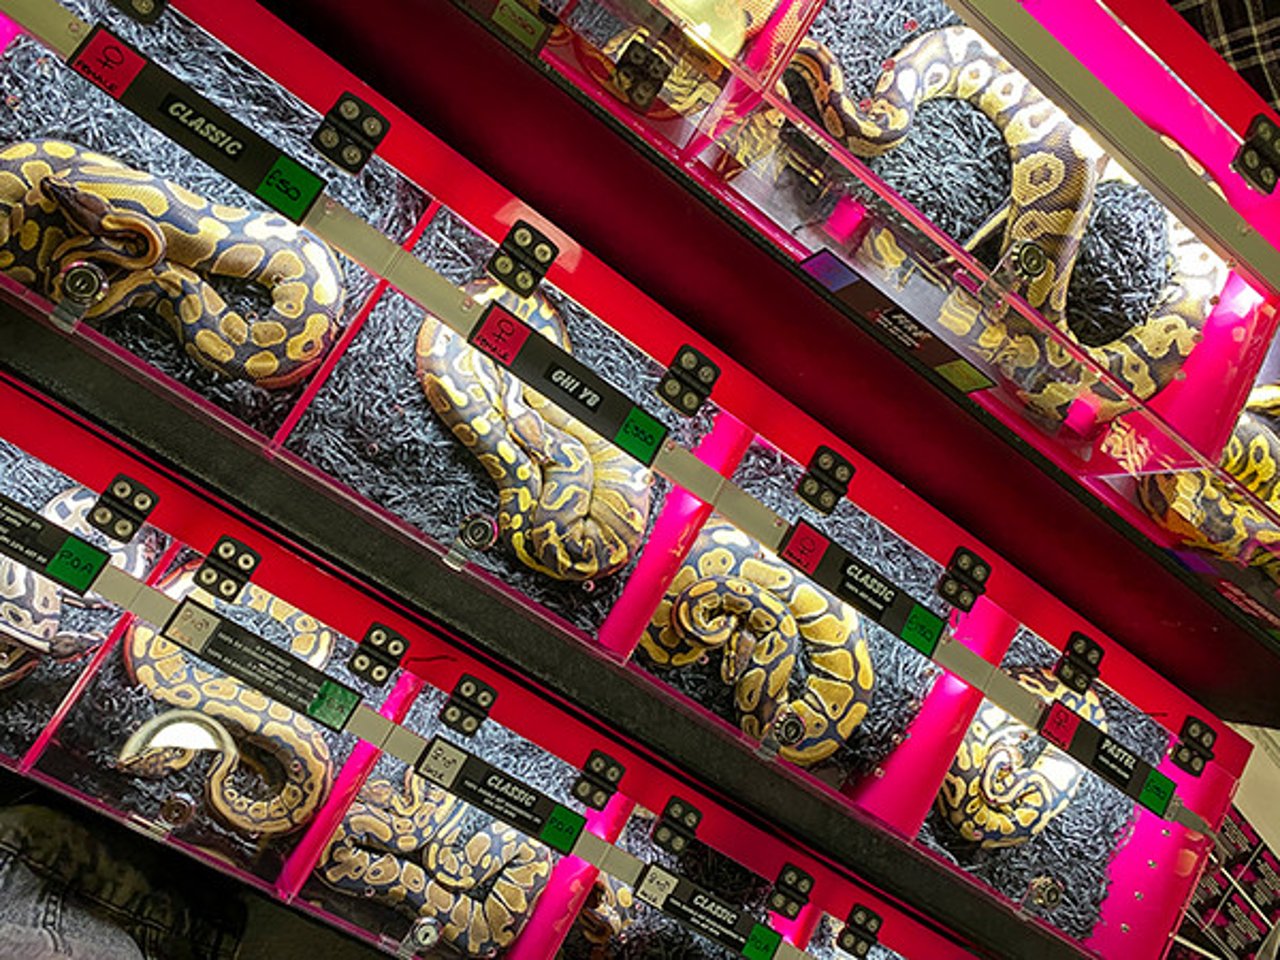 Snakes in small storing containers are piled high at the Doncaster Racecourse reptile market.